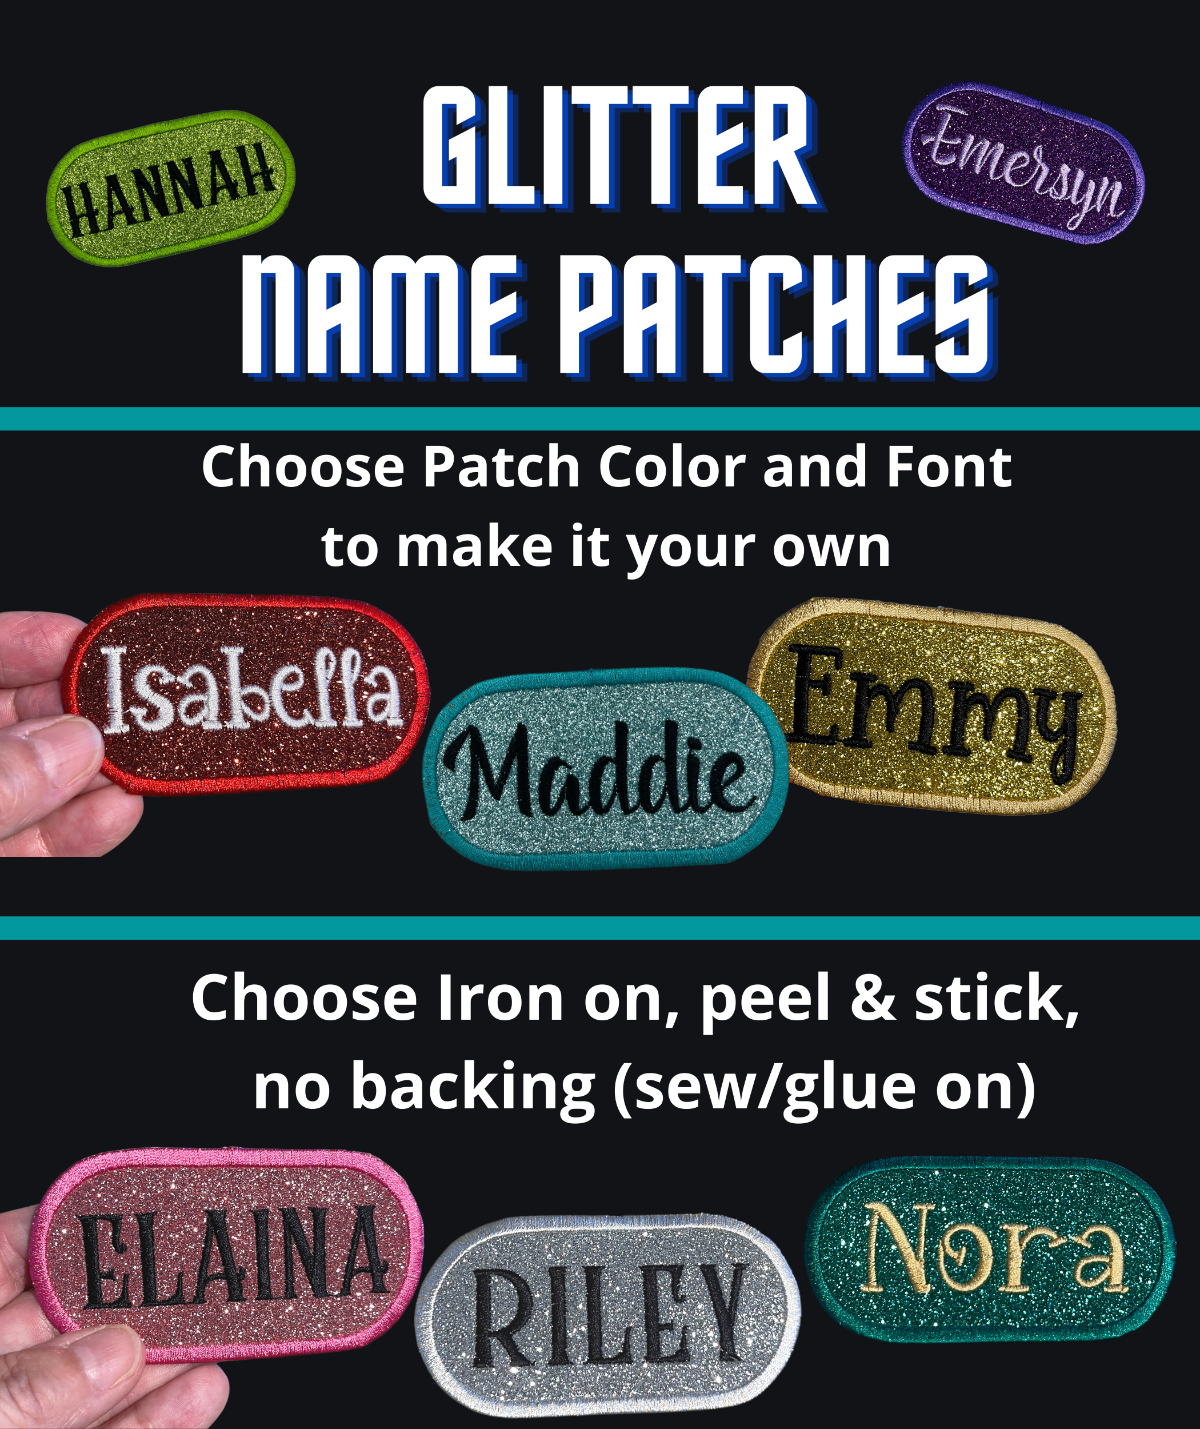 Glitter name patches